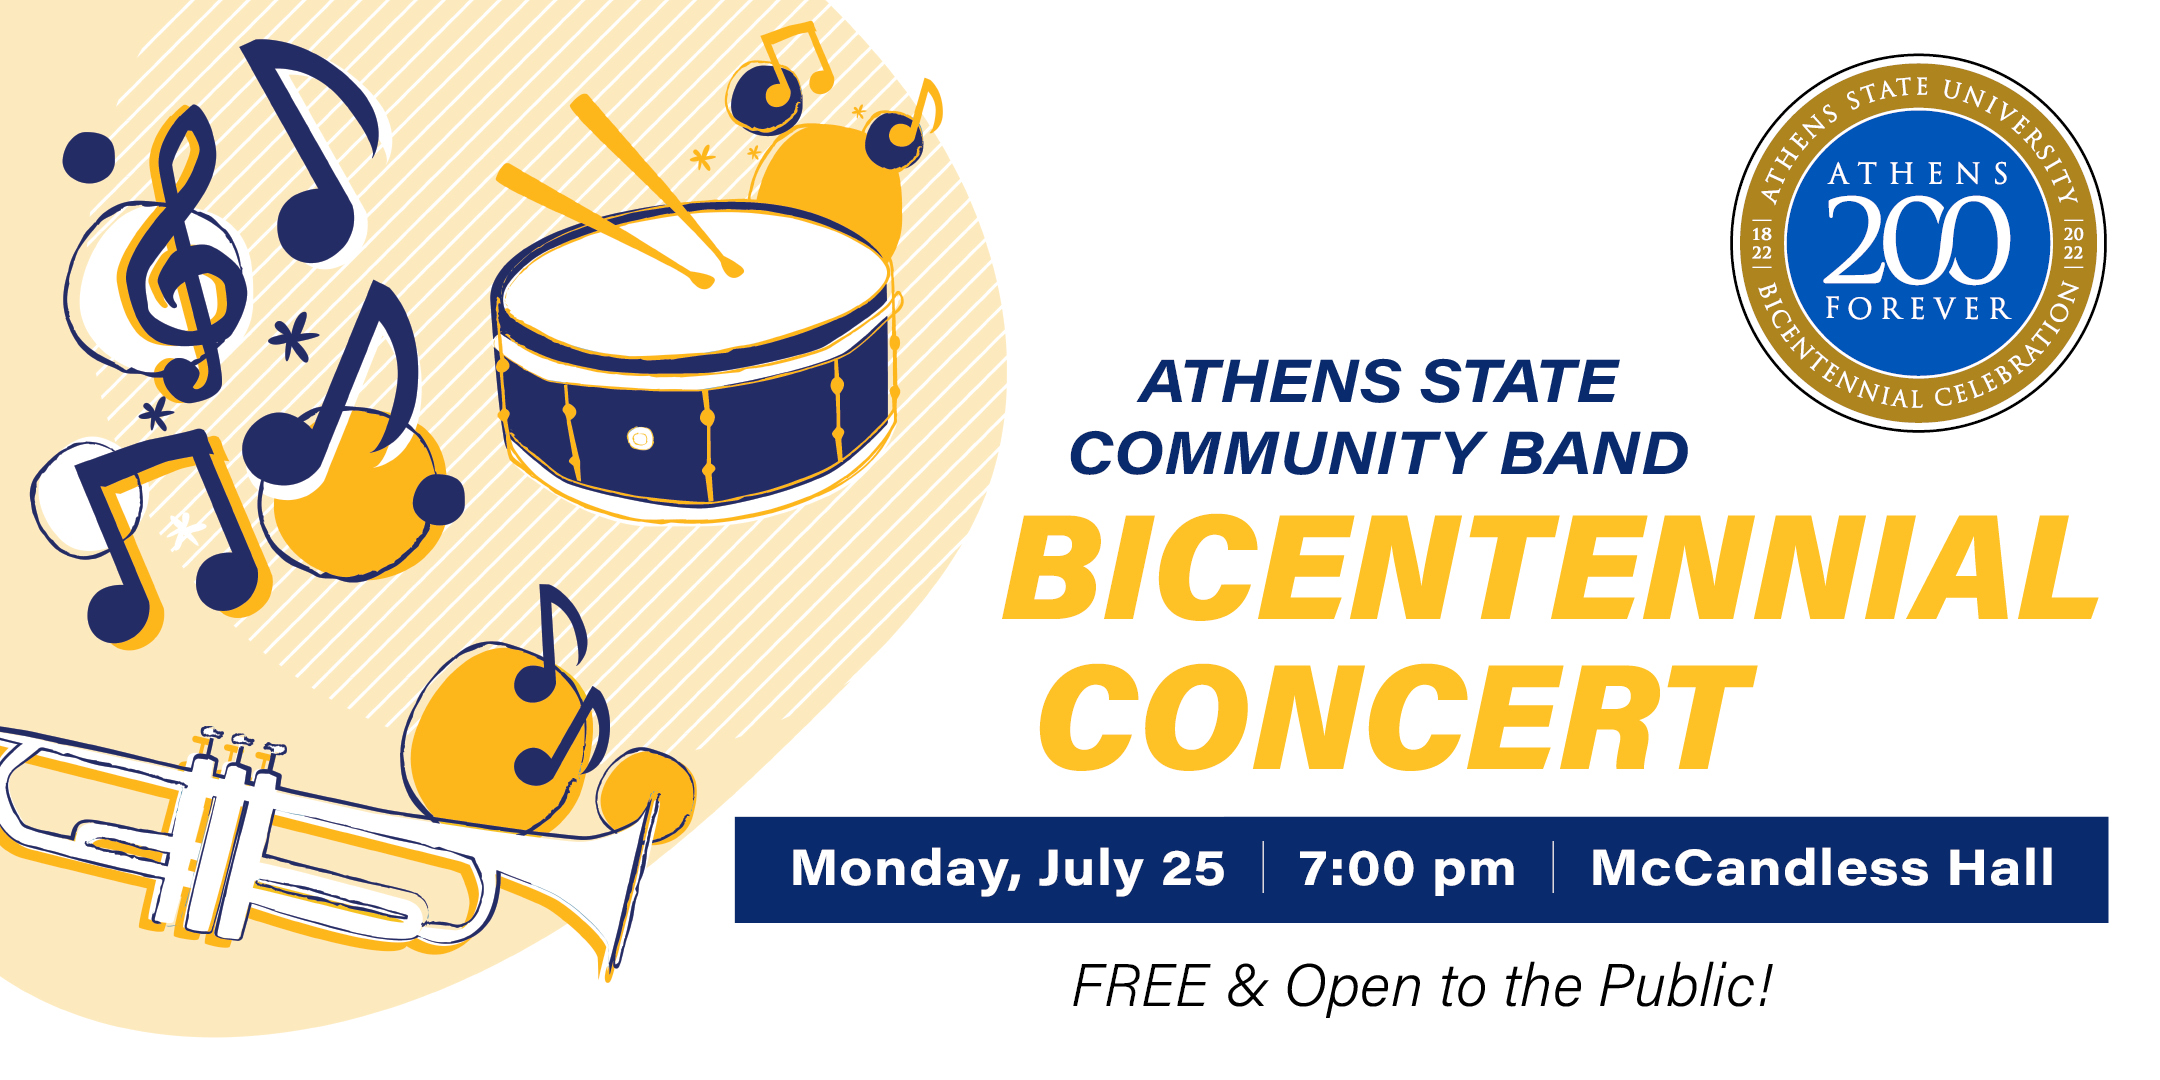 Athens State Community Band Flyer